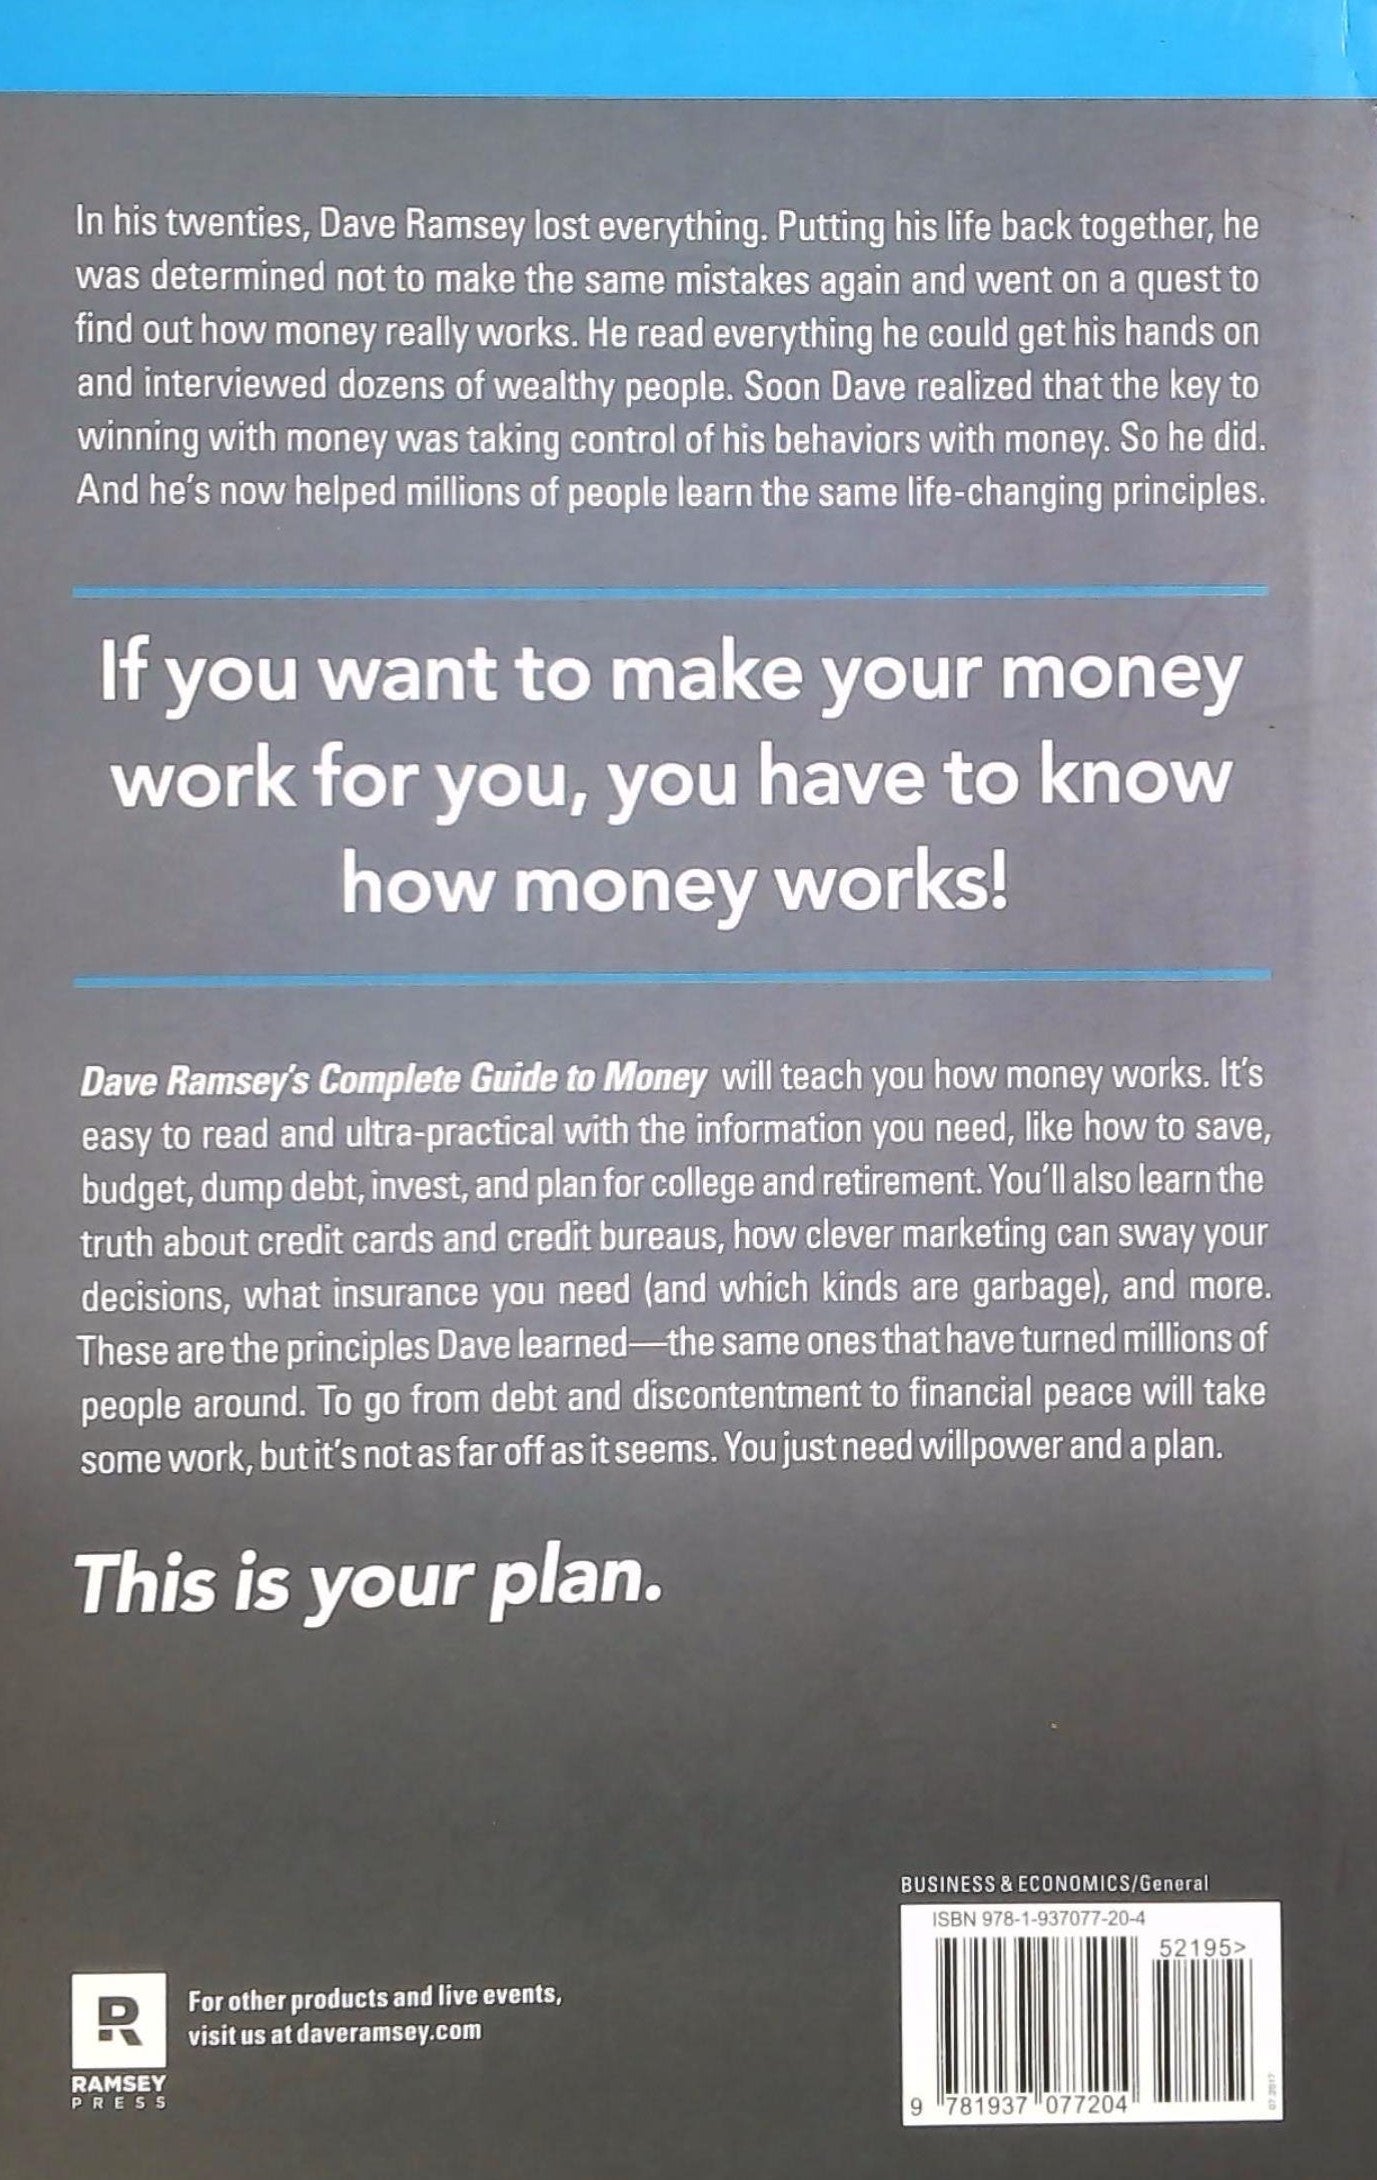 Dave Ramsey's complete Guide to Money (Dave Ramsey)